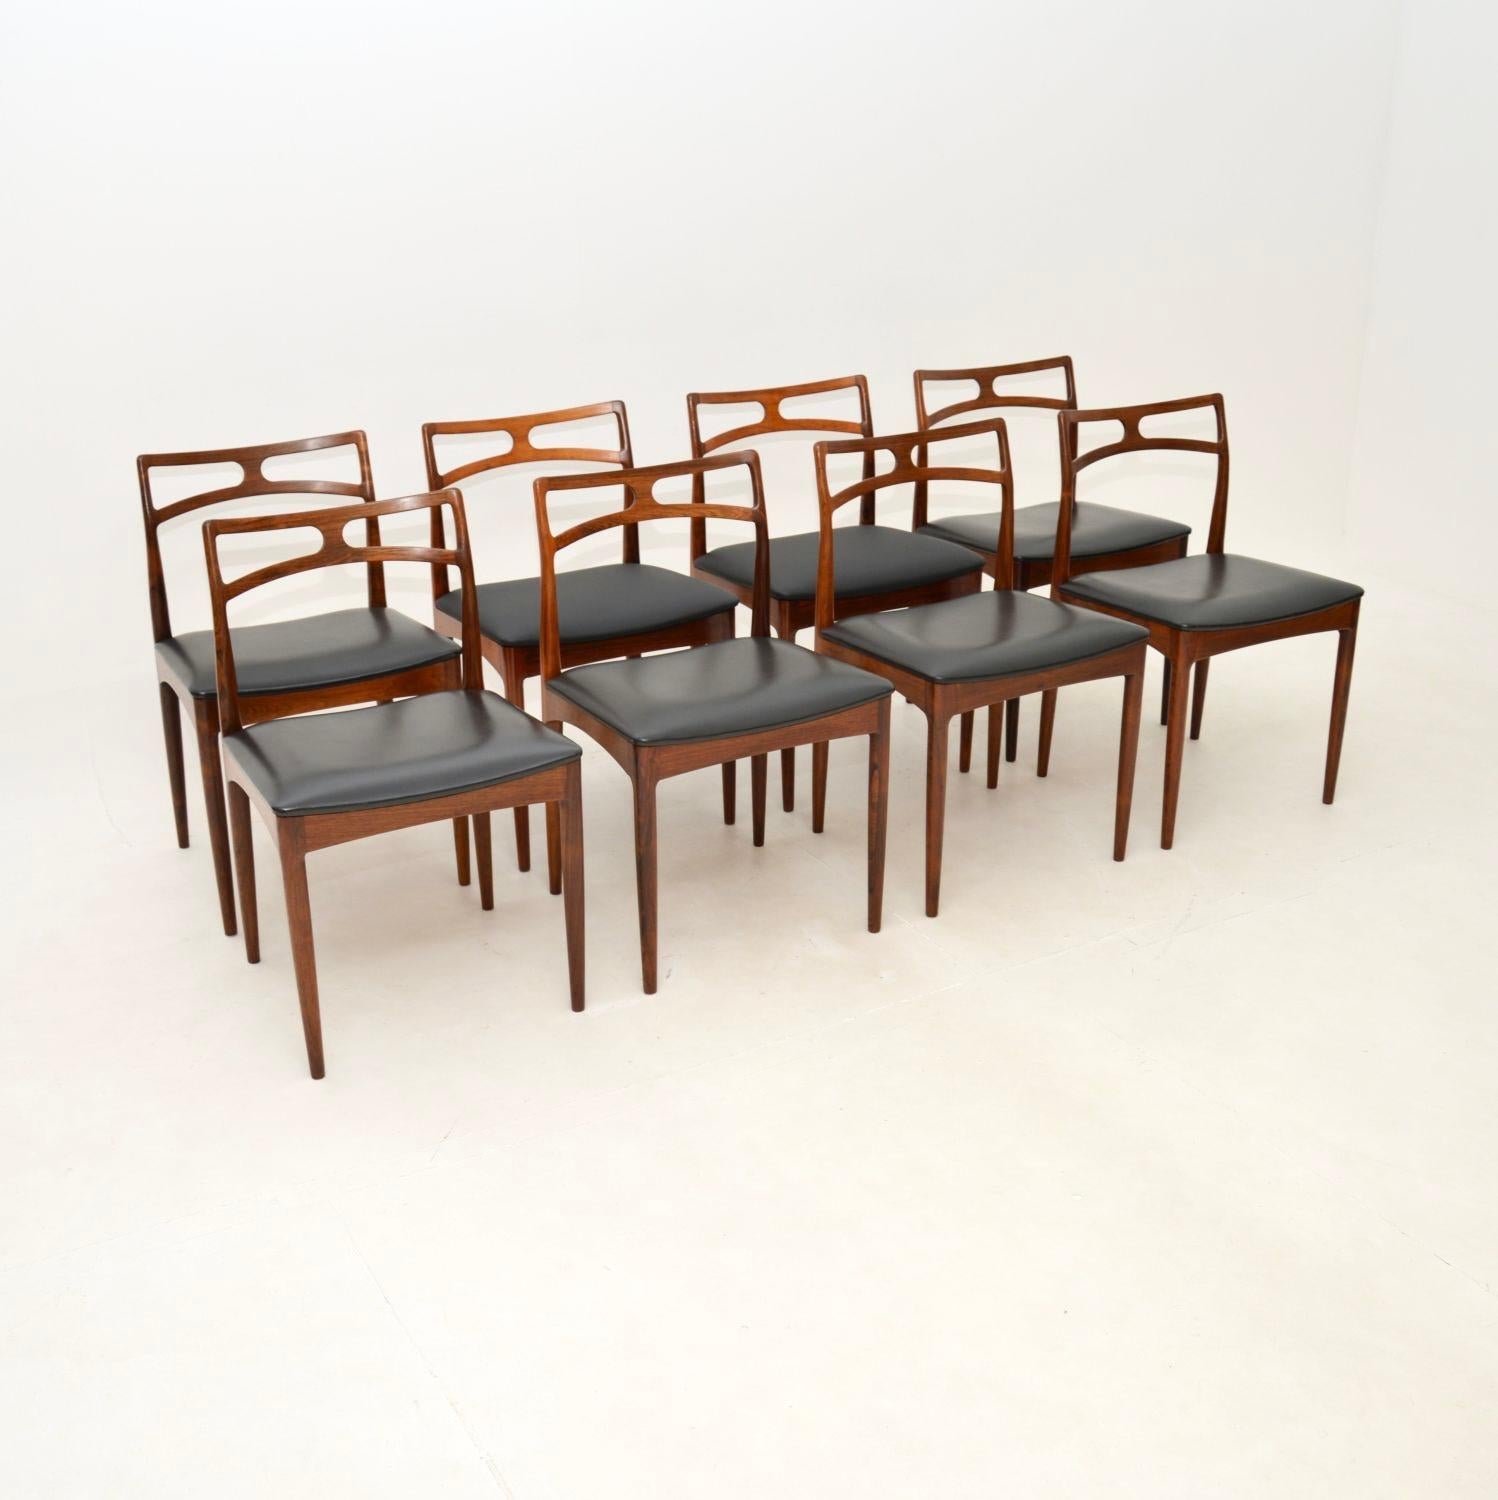 A stunning set of six vintage model 94 dining chairs, designed by Johannes Andersen for Christian Linneberg. These were made in Denmark, they date from the 1960’s.

The quality is superb, these have a stylish and very elegant design. They are